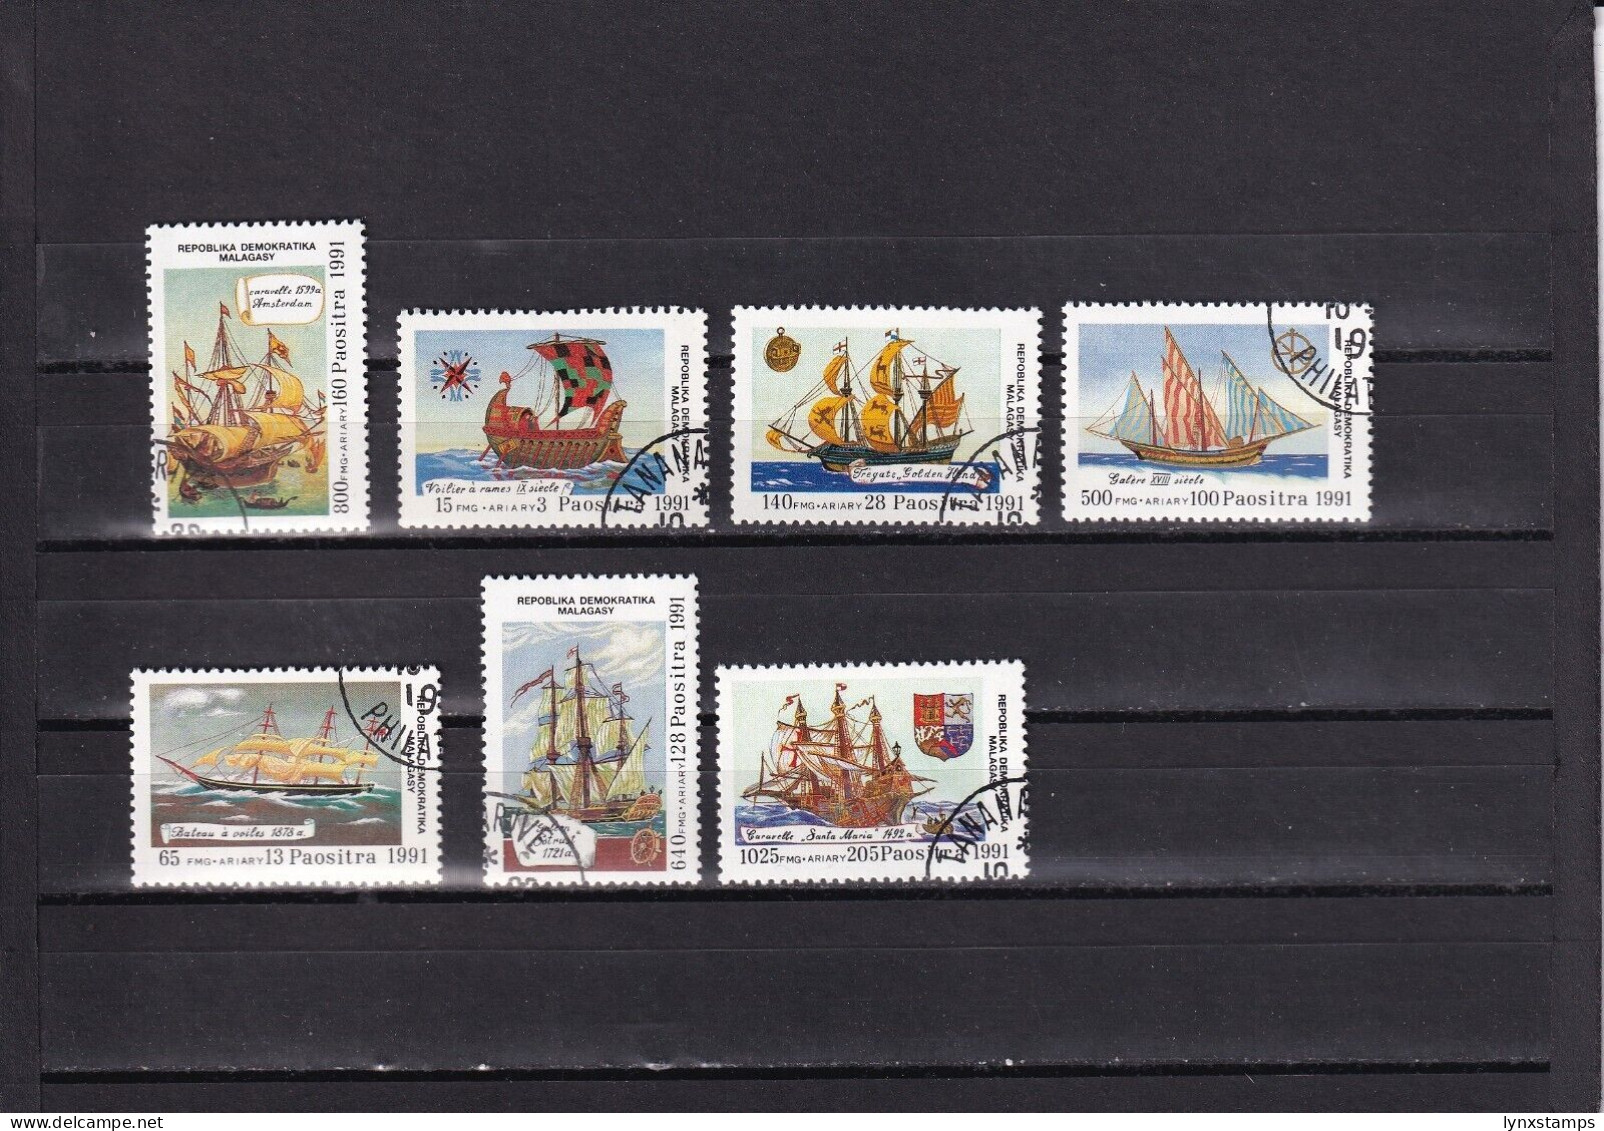 SA03 Madagascar 1991 The 500th Anniversary Of The Discovery Of The Americas Used - Ships